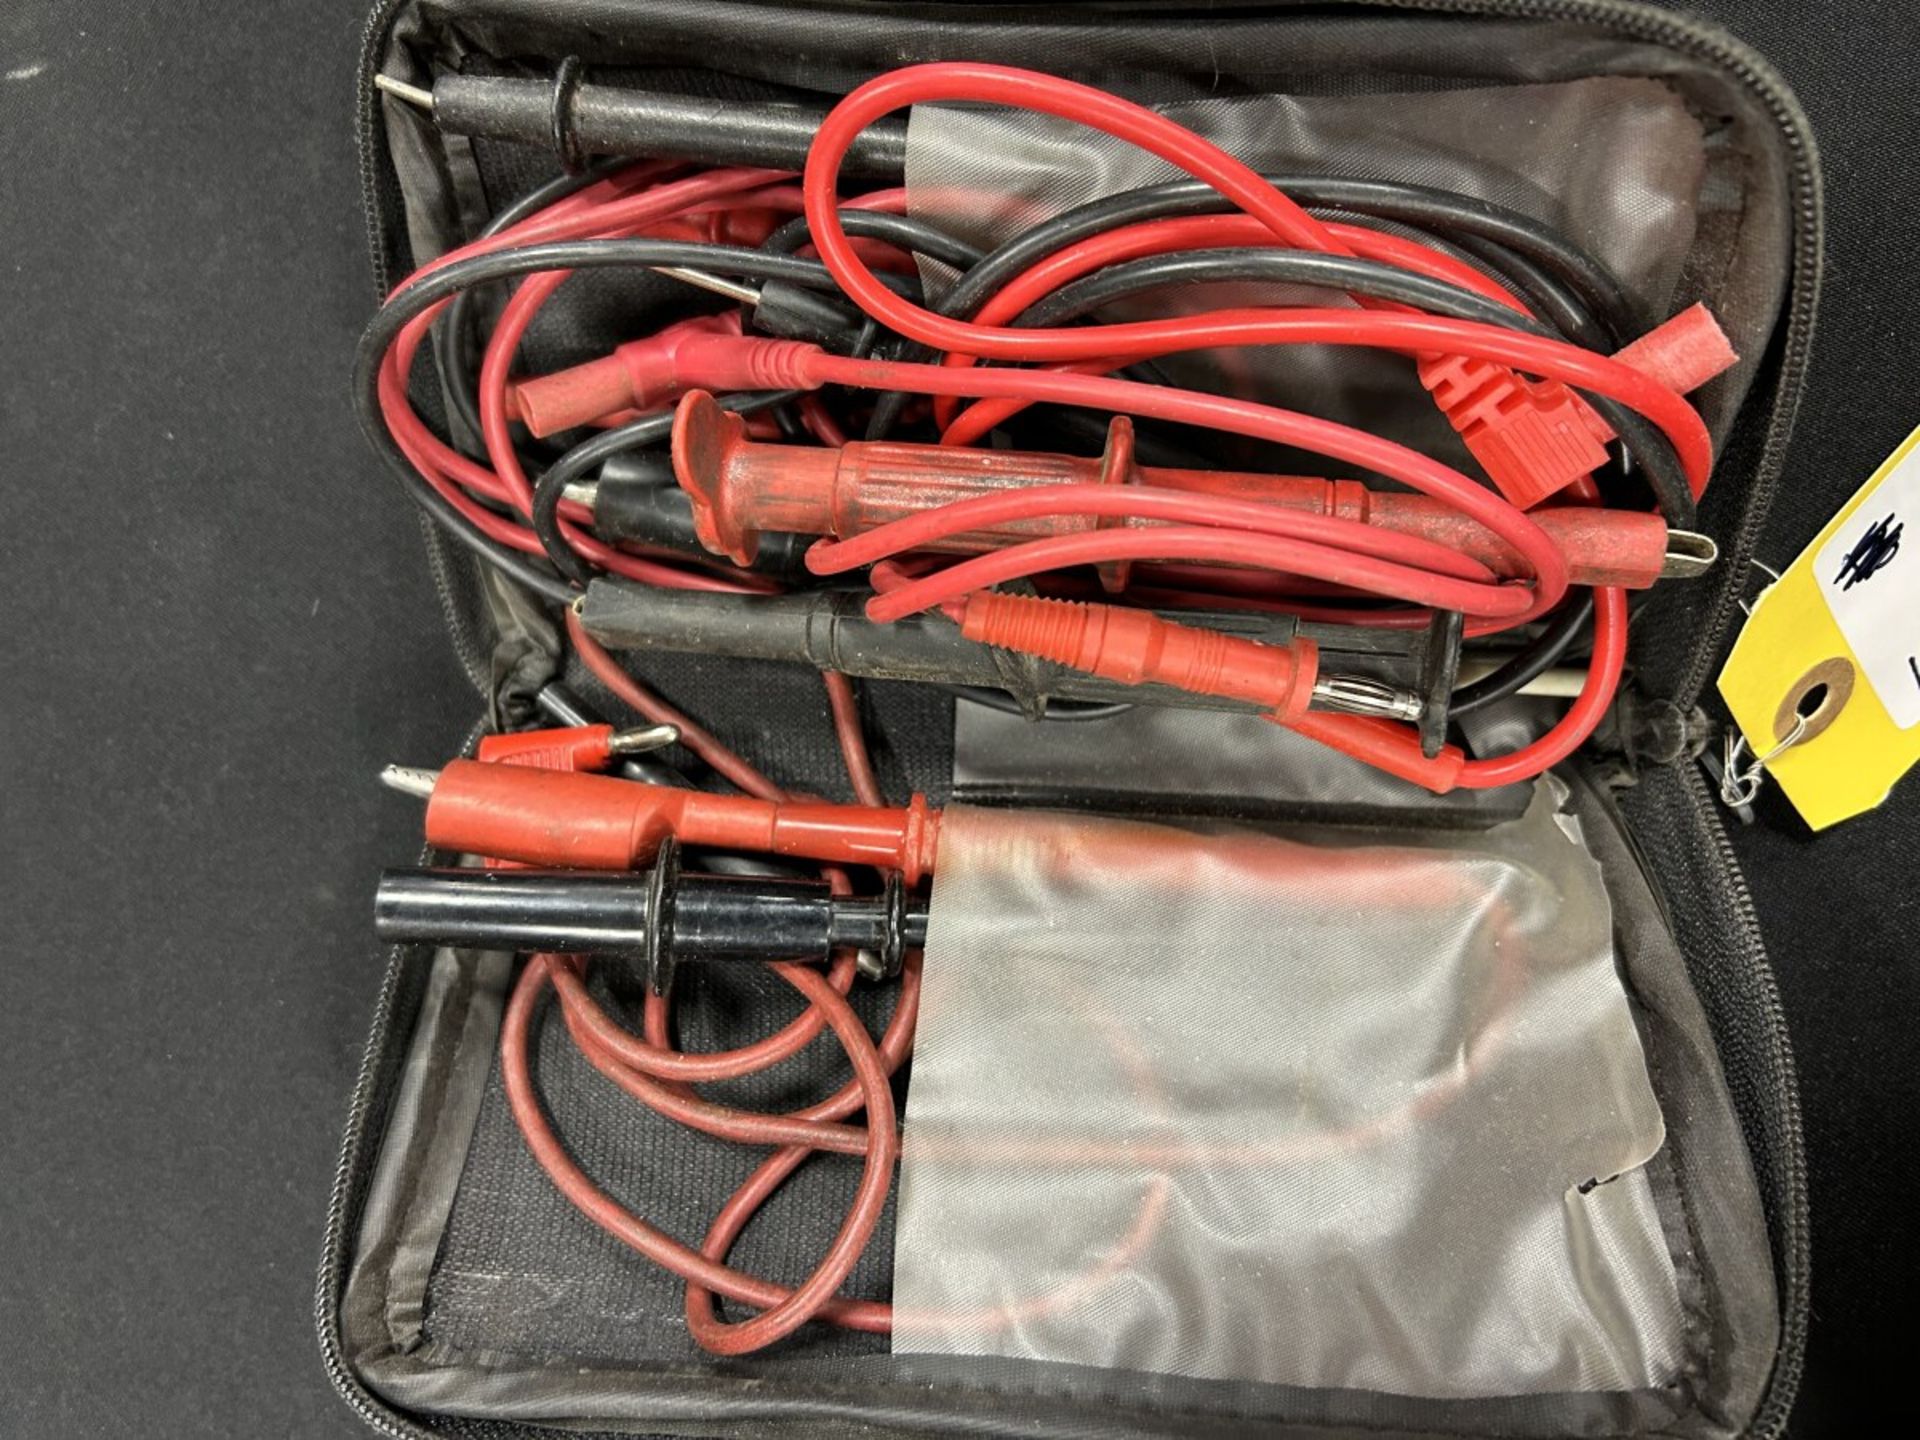 ALTK INDUSTRIES LOOP CALIBRATER MODEL: 334 W/ ASSORTED FLUKE CONNECTION WIRES - Image 5 of 5